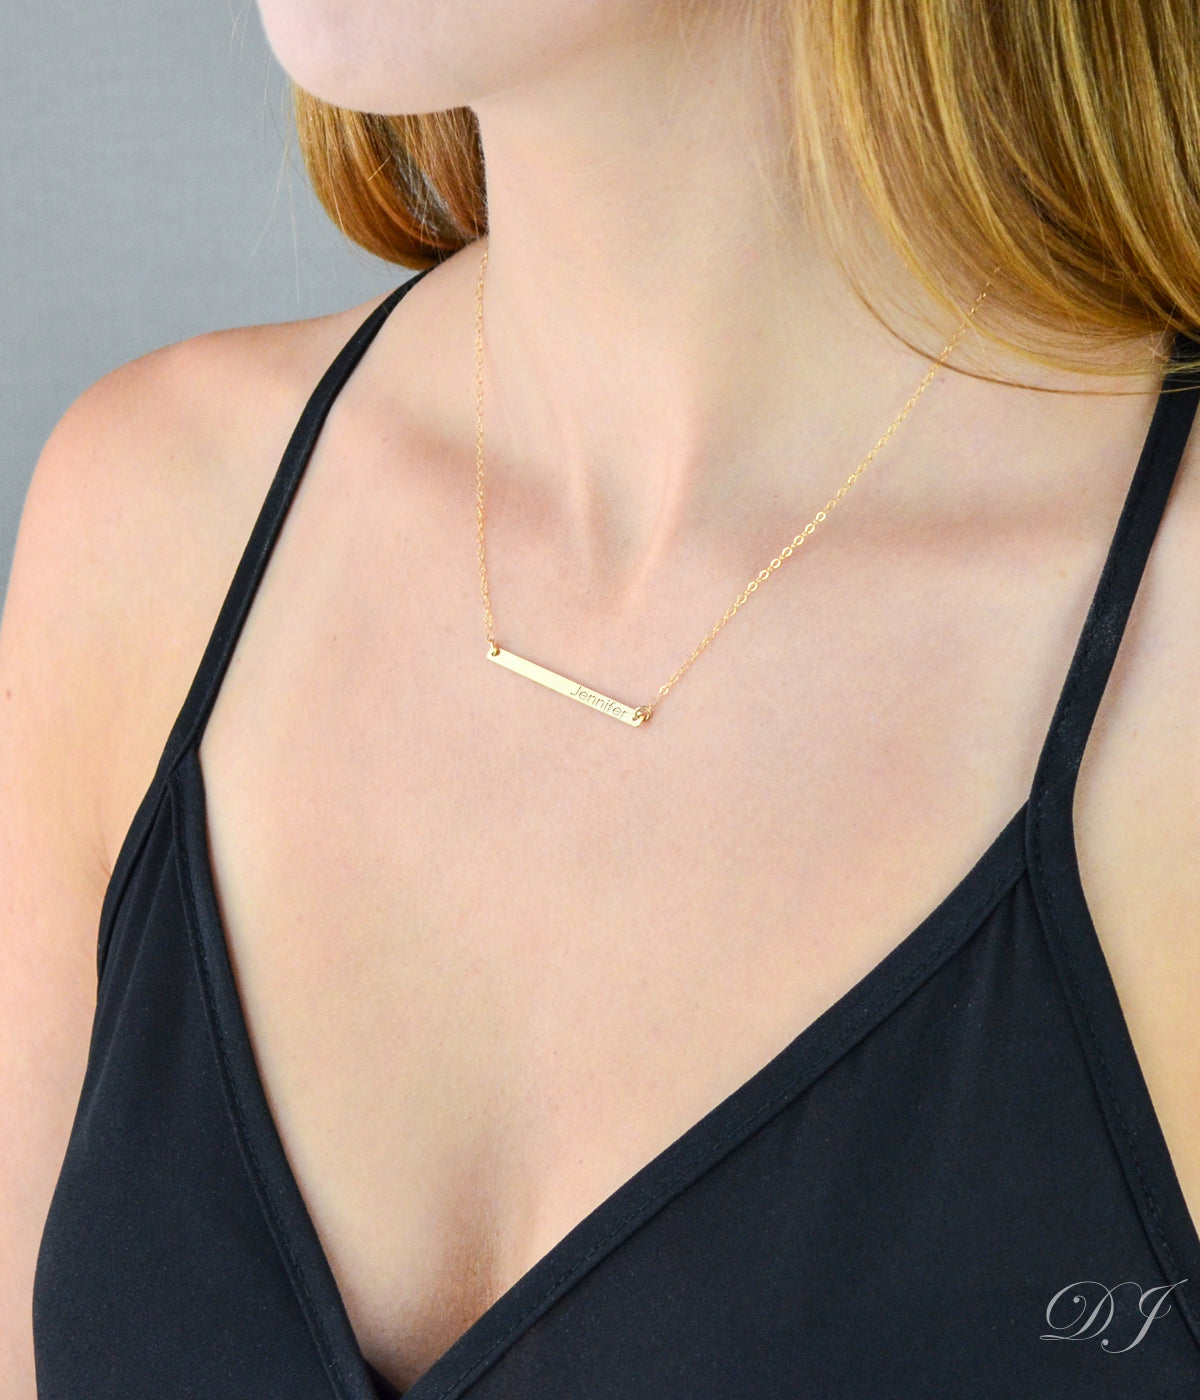 Goldfilled Initial Necklace - Gold Letter Necklace - Tiny Initial Necklace  - Delicate Gold Necklace on Luulla